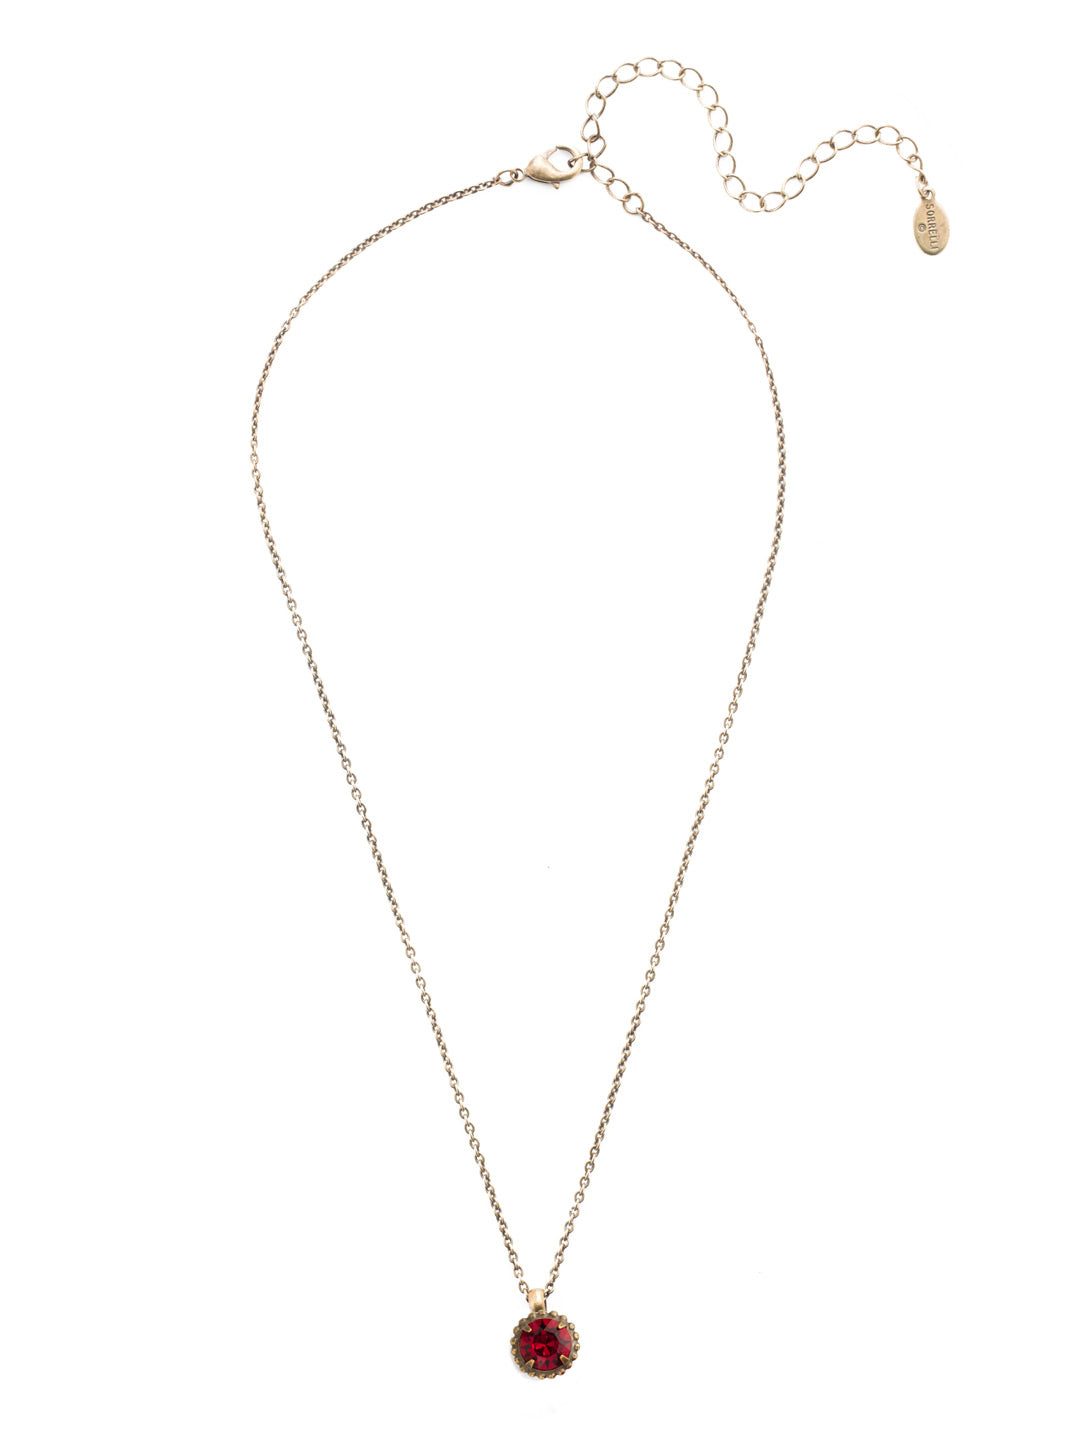 Simplicity Pendant Necklace - NBY38AGSI - <p>Perfect for any day! The Simplicity Pendant Necklace features a round cut crystal with vintage edging. From Sorrelli's Siam collection in our Antique Gold-tone finish.</p>